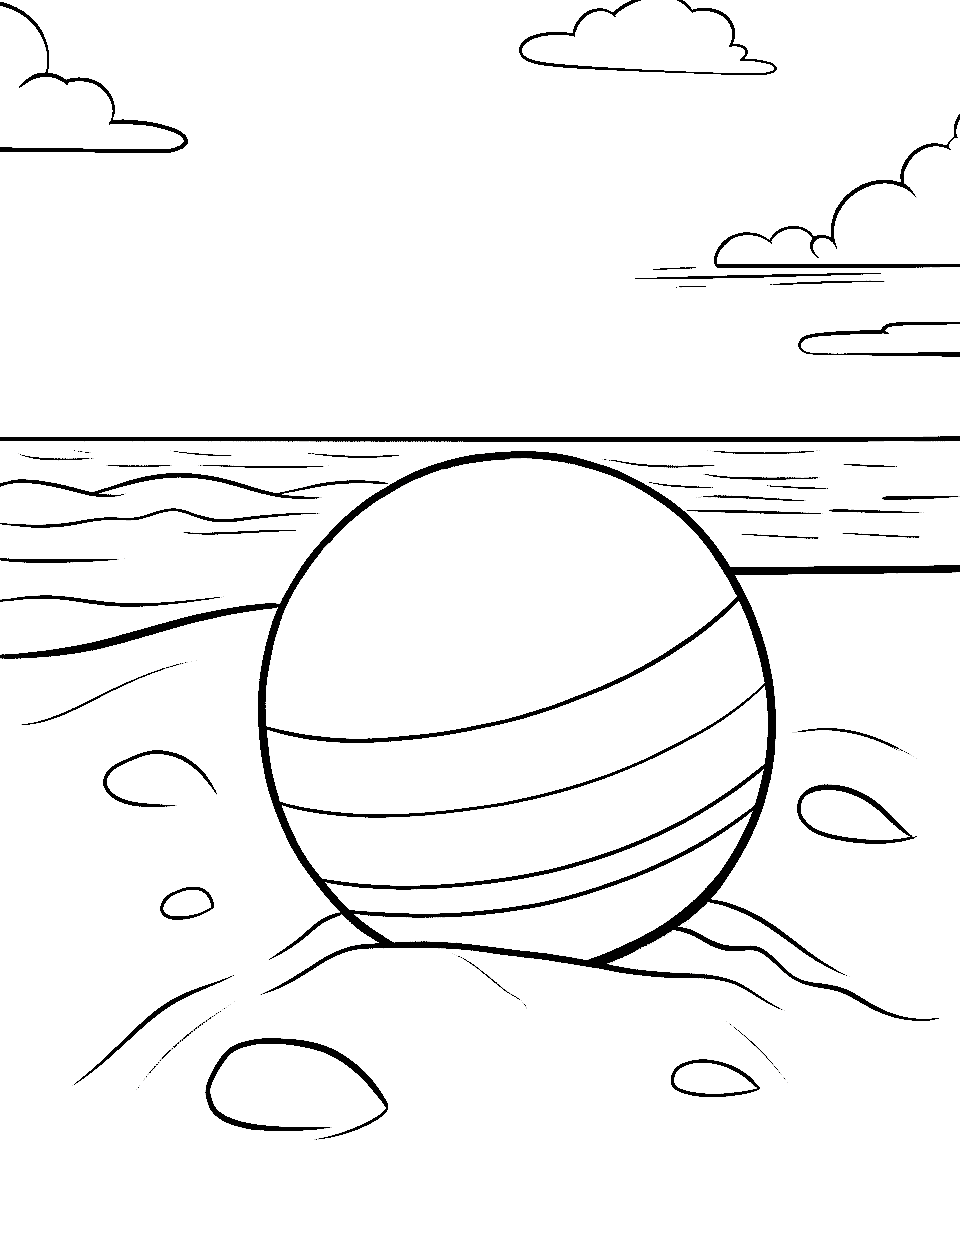 Easy Beach Ball Coloring Page - A colorful, striped beach ball sitting on a clear, sandy beach.